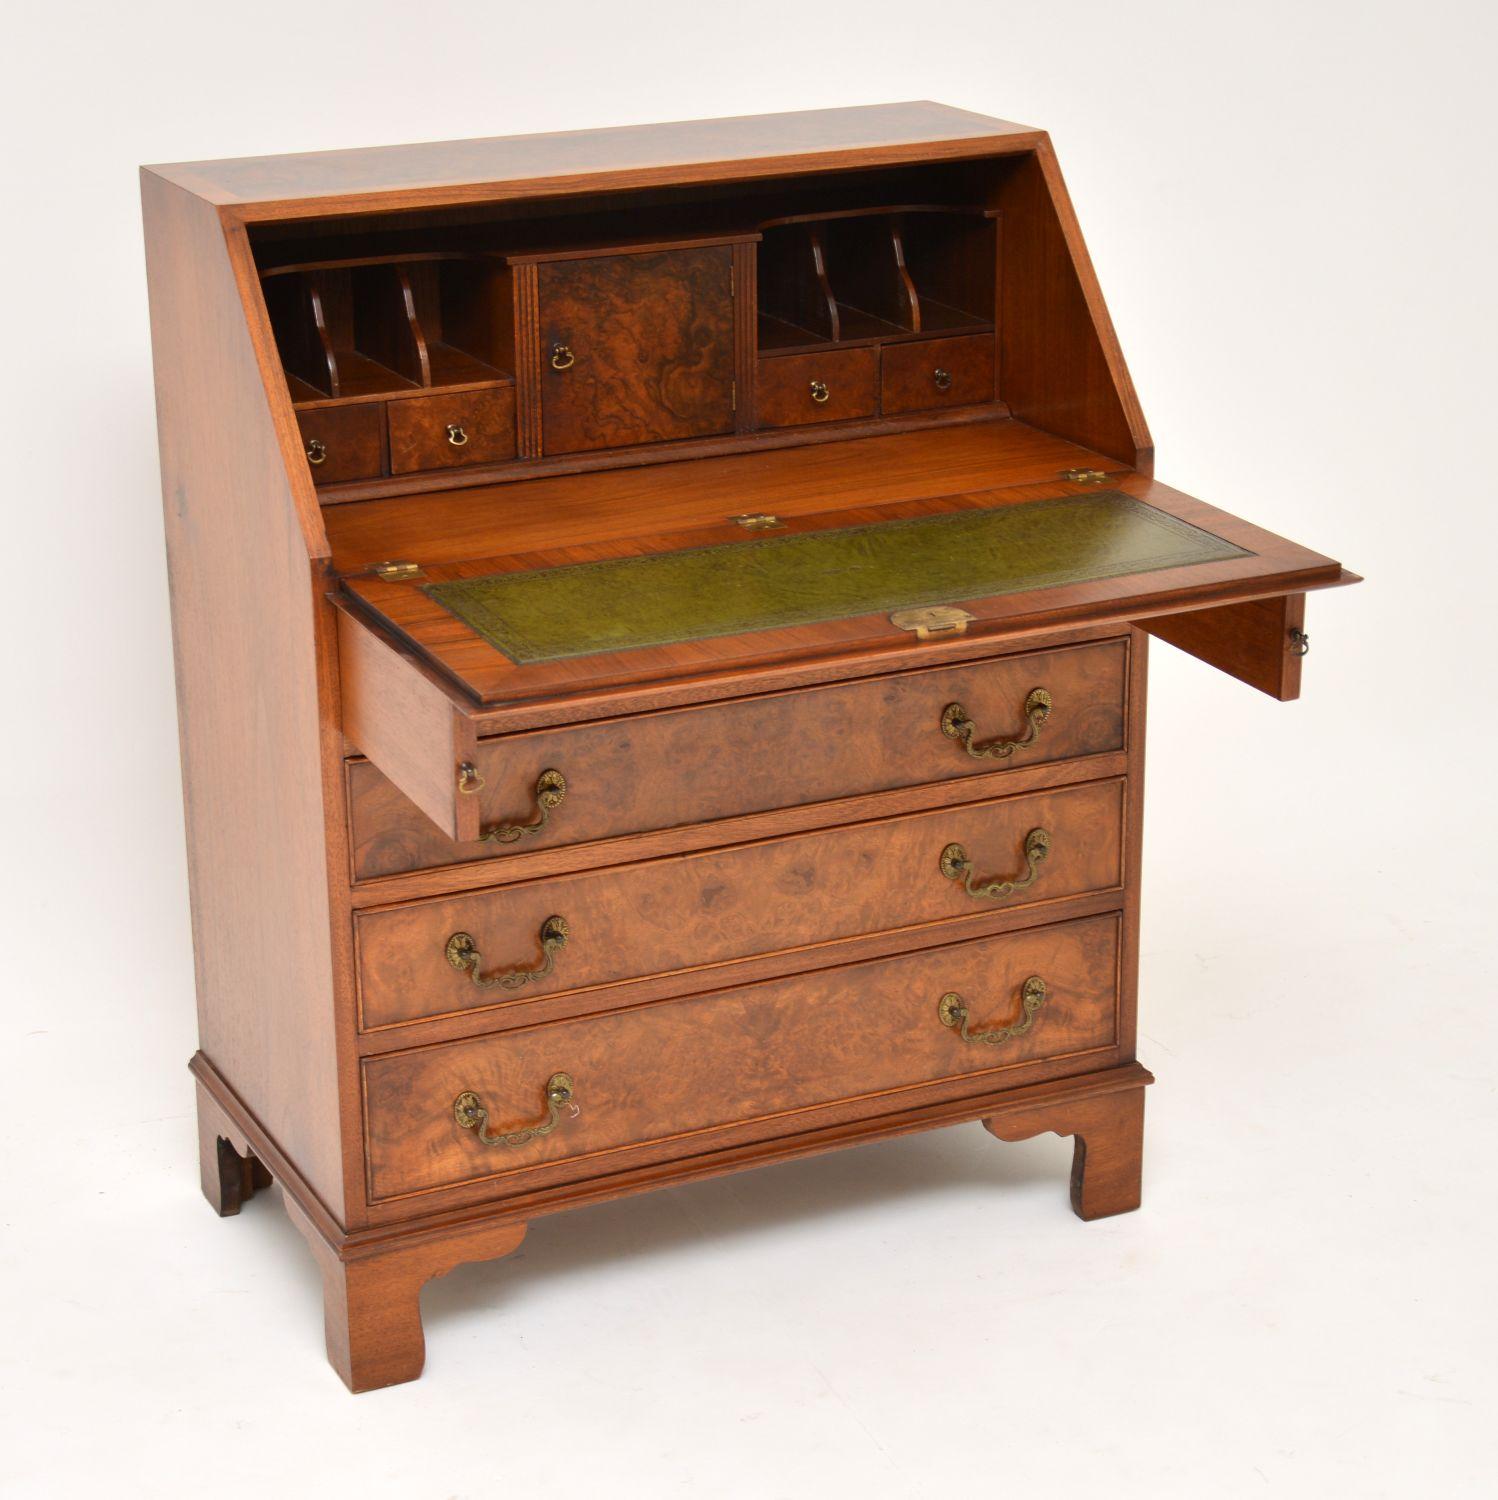 Antique George III style burr walnut bureau in very good original condition, dating to circa 1930s-1950s period. It has particularly nice figuring on the top which is crossbanded and down the front, plus it has a lovely mellow color. The drawers